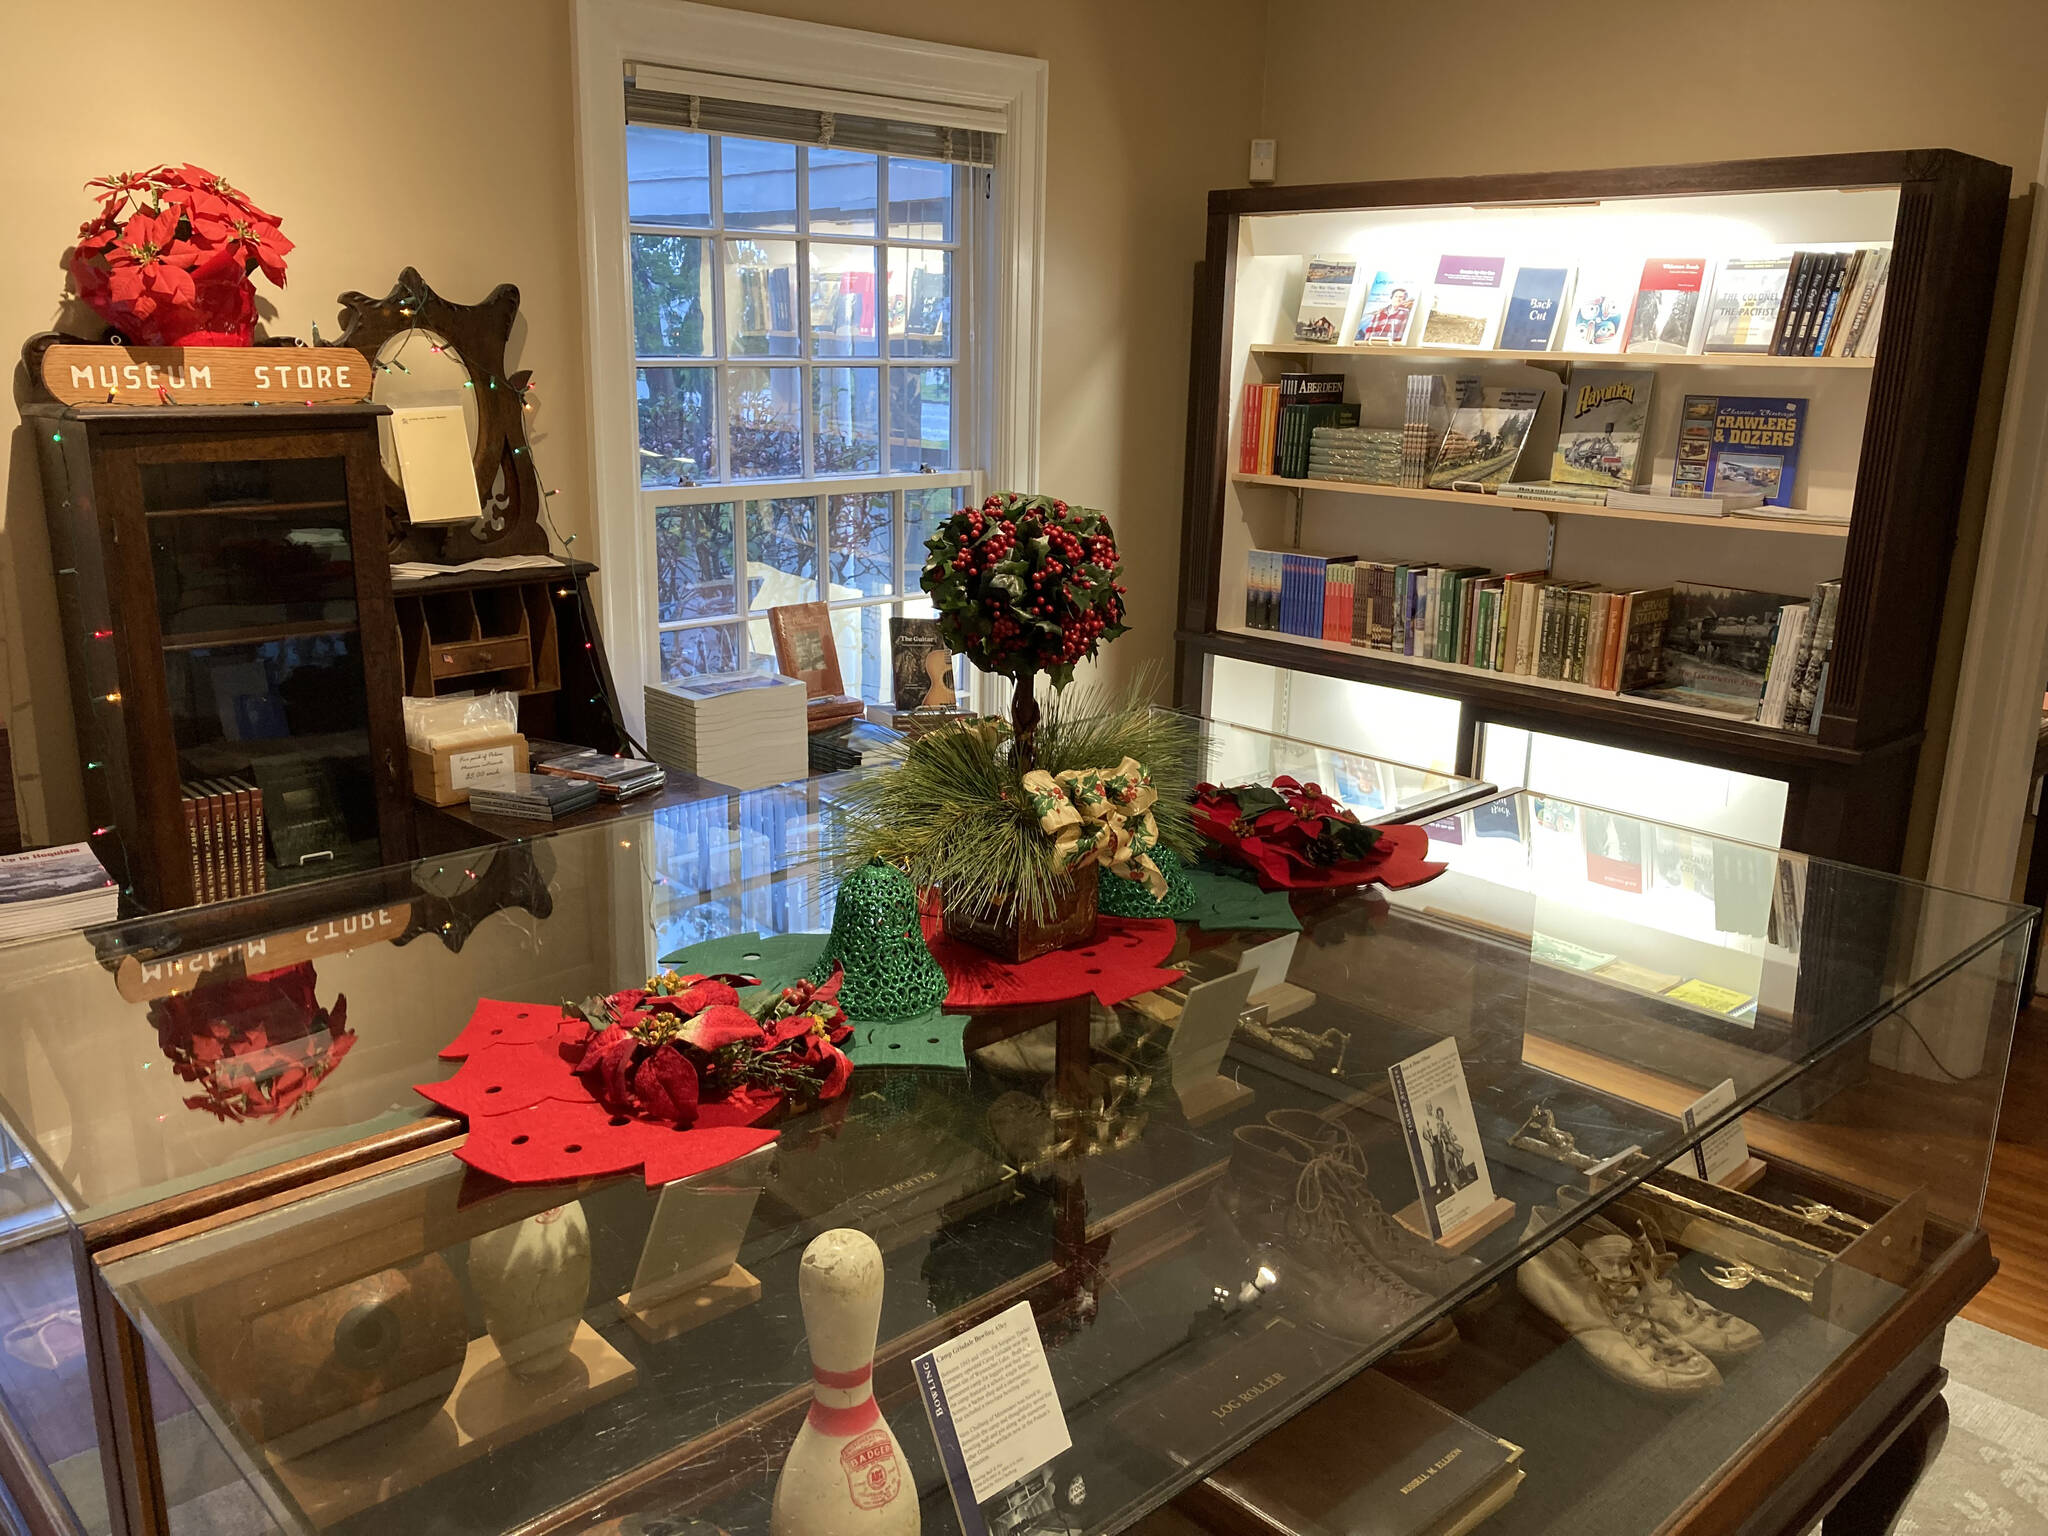 Lot of Christmas gift ideas are ready for your perusal at the Polson Museum gift shop.
Photo submitted by John Larson